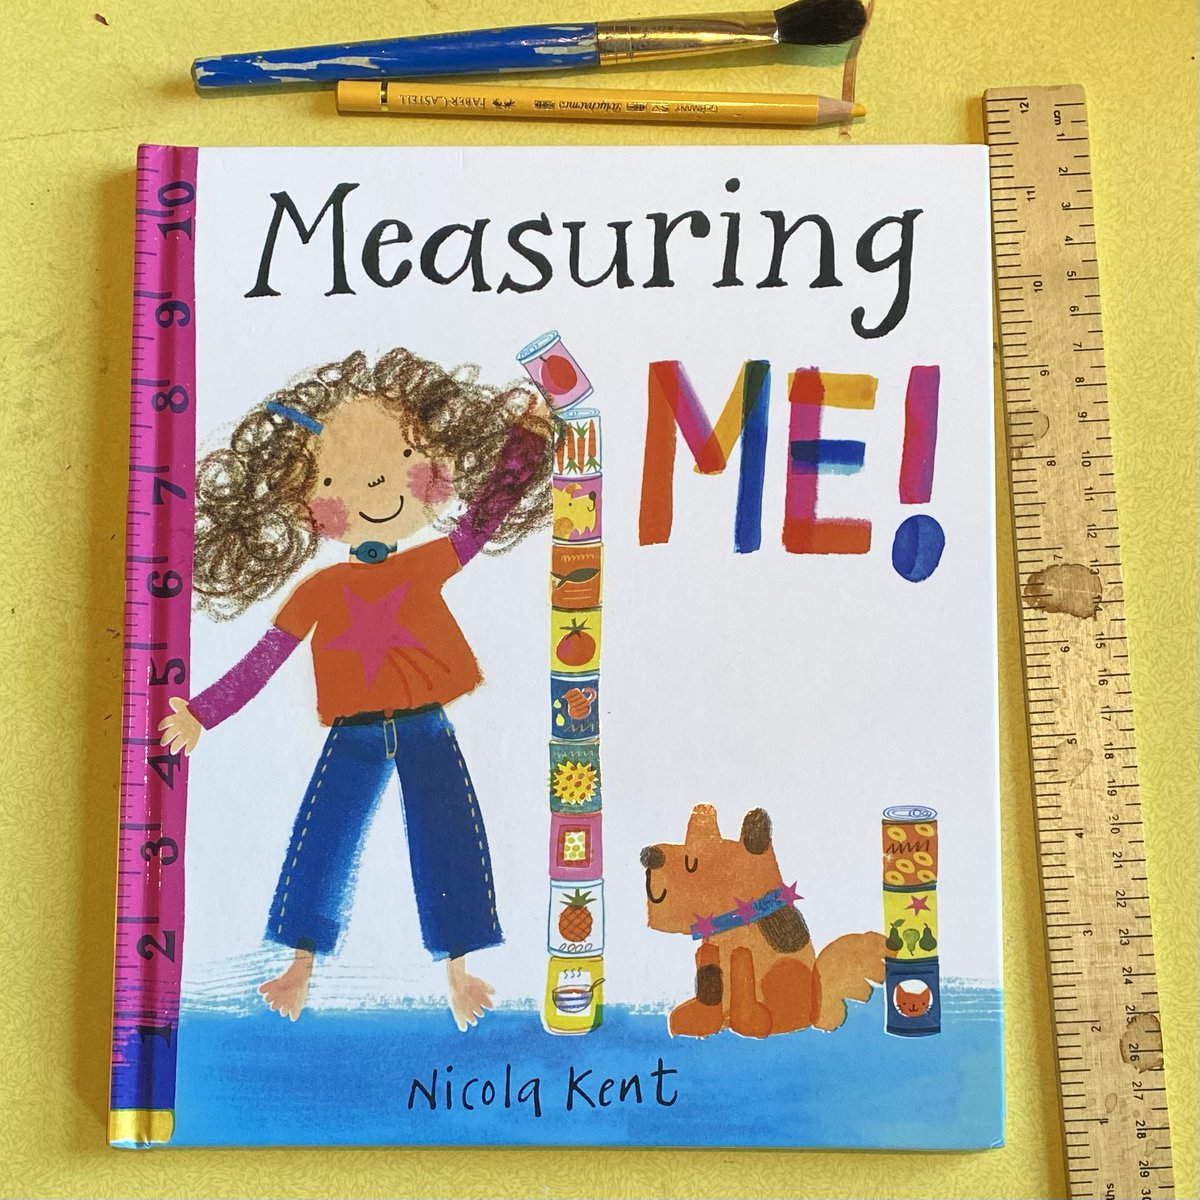 📏📐🥳A very happy publication day to Measuring Me - my first non-fiction picture book! 'Award-winning author and illustrator Nicola Kent works her magic on a clever new picture book which presents the topic of measuring in an exciting and personal way.' Lancs Eve Post 🙏💛